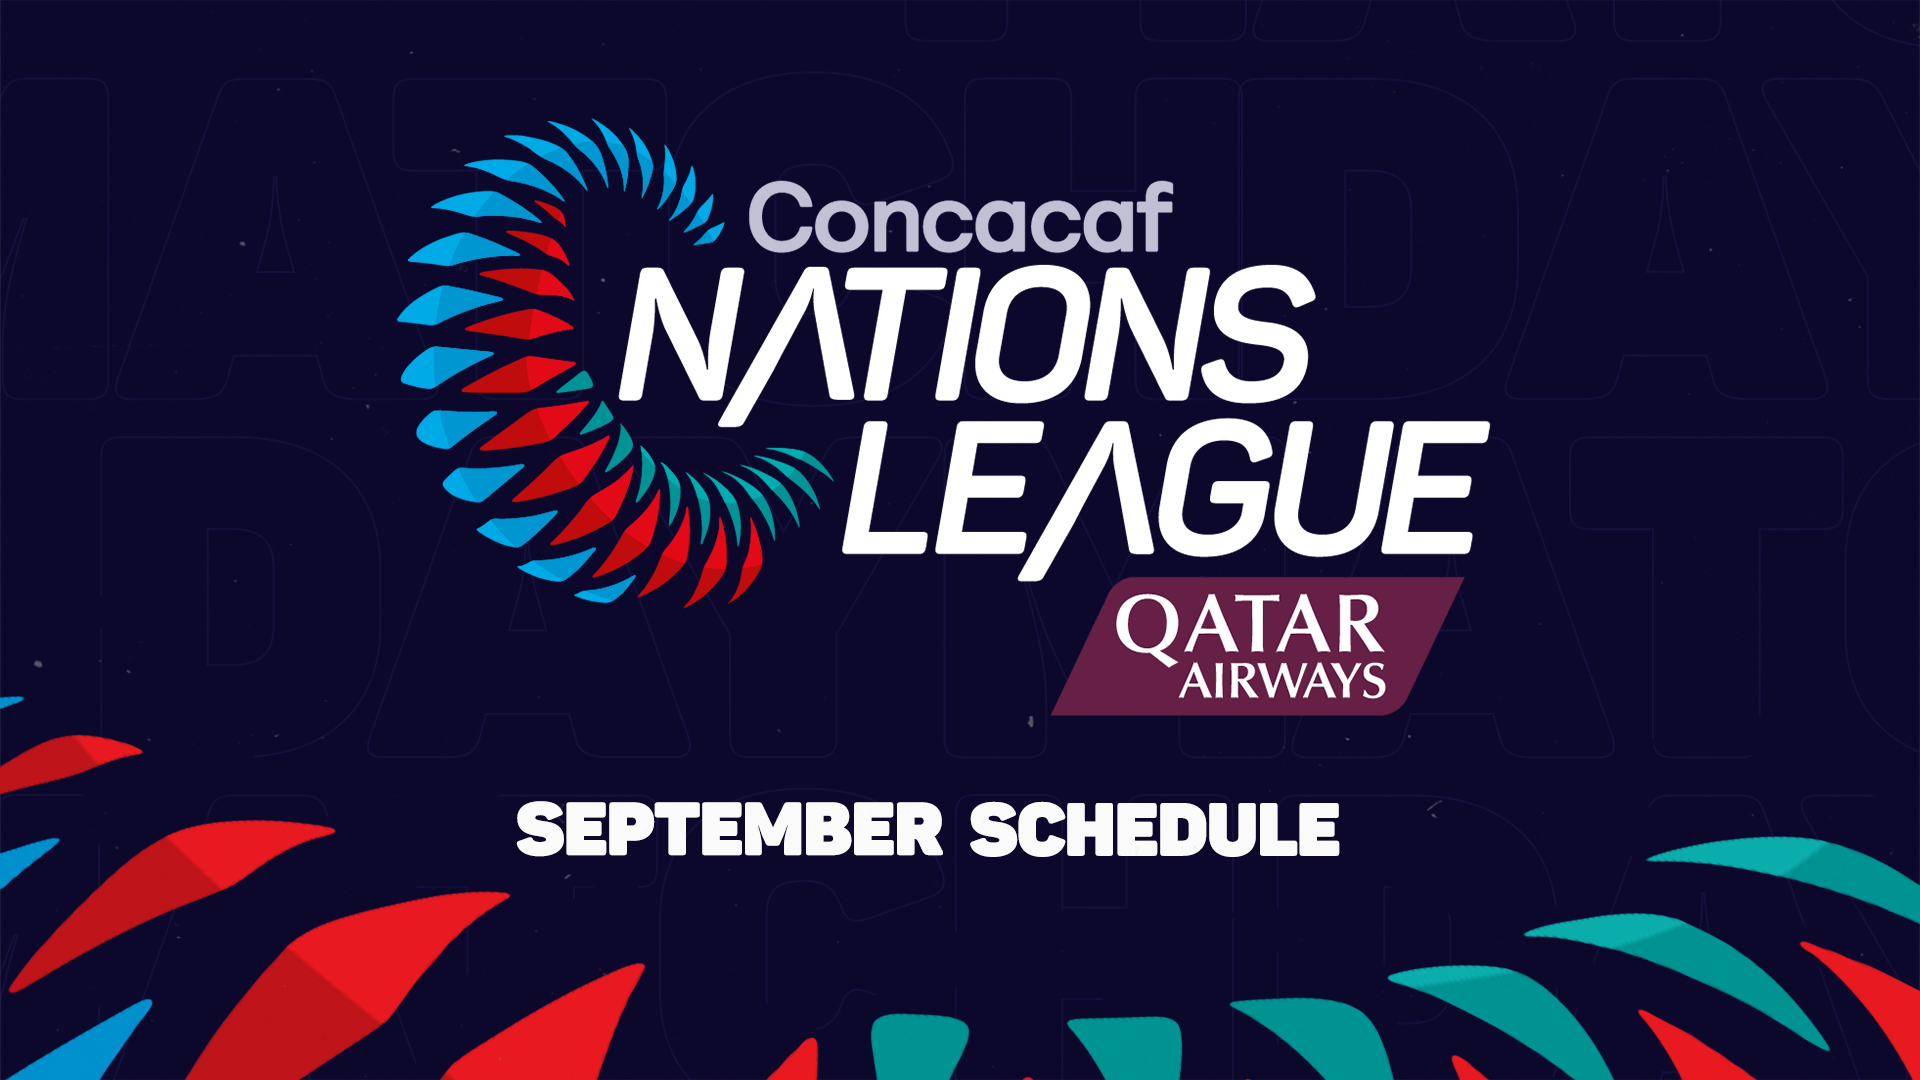 2022-23 Concacaf Nations League